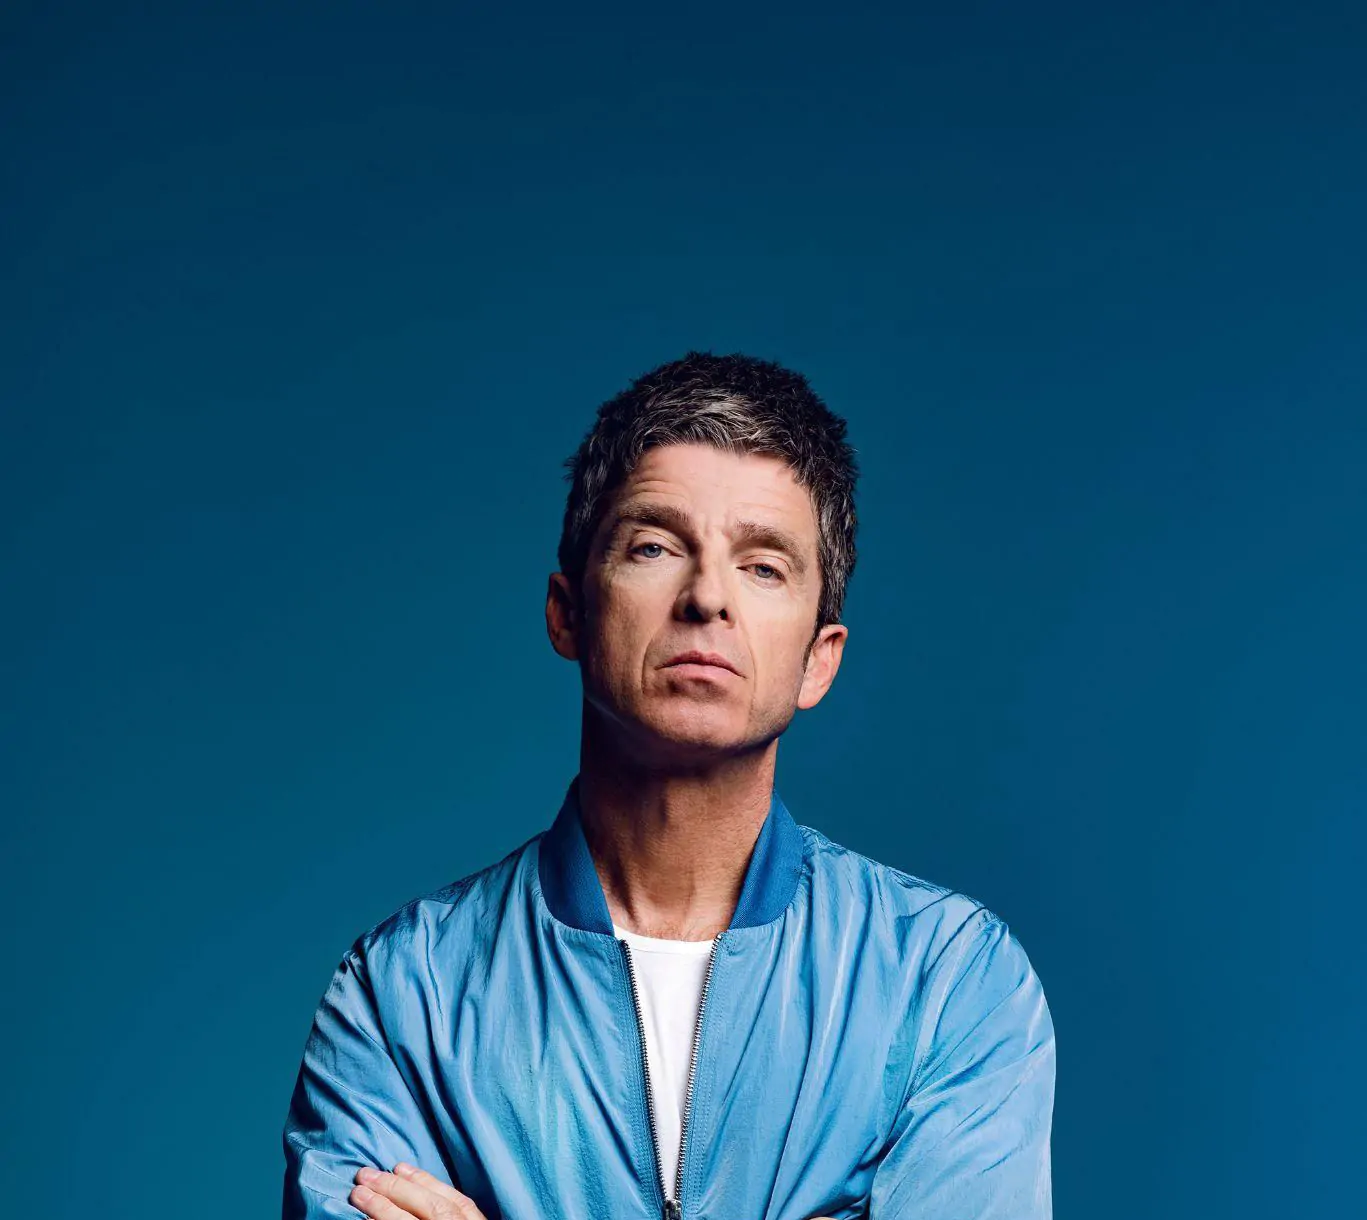 NOEL GALLAGHER’S HIGH FLYING BIRDS release official music video for new single ‘We’re On Our Way Now’